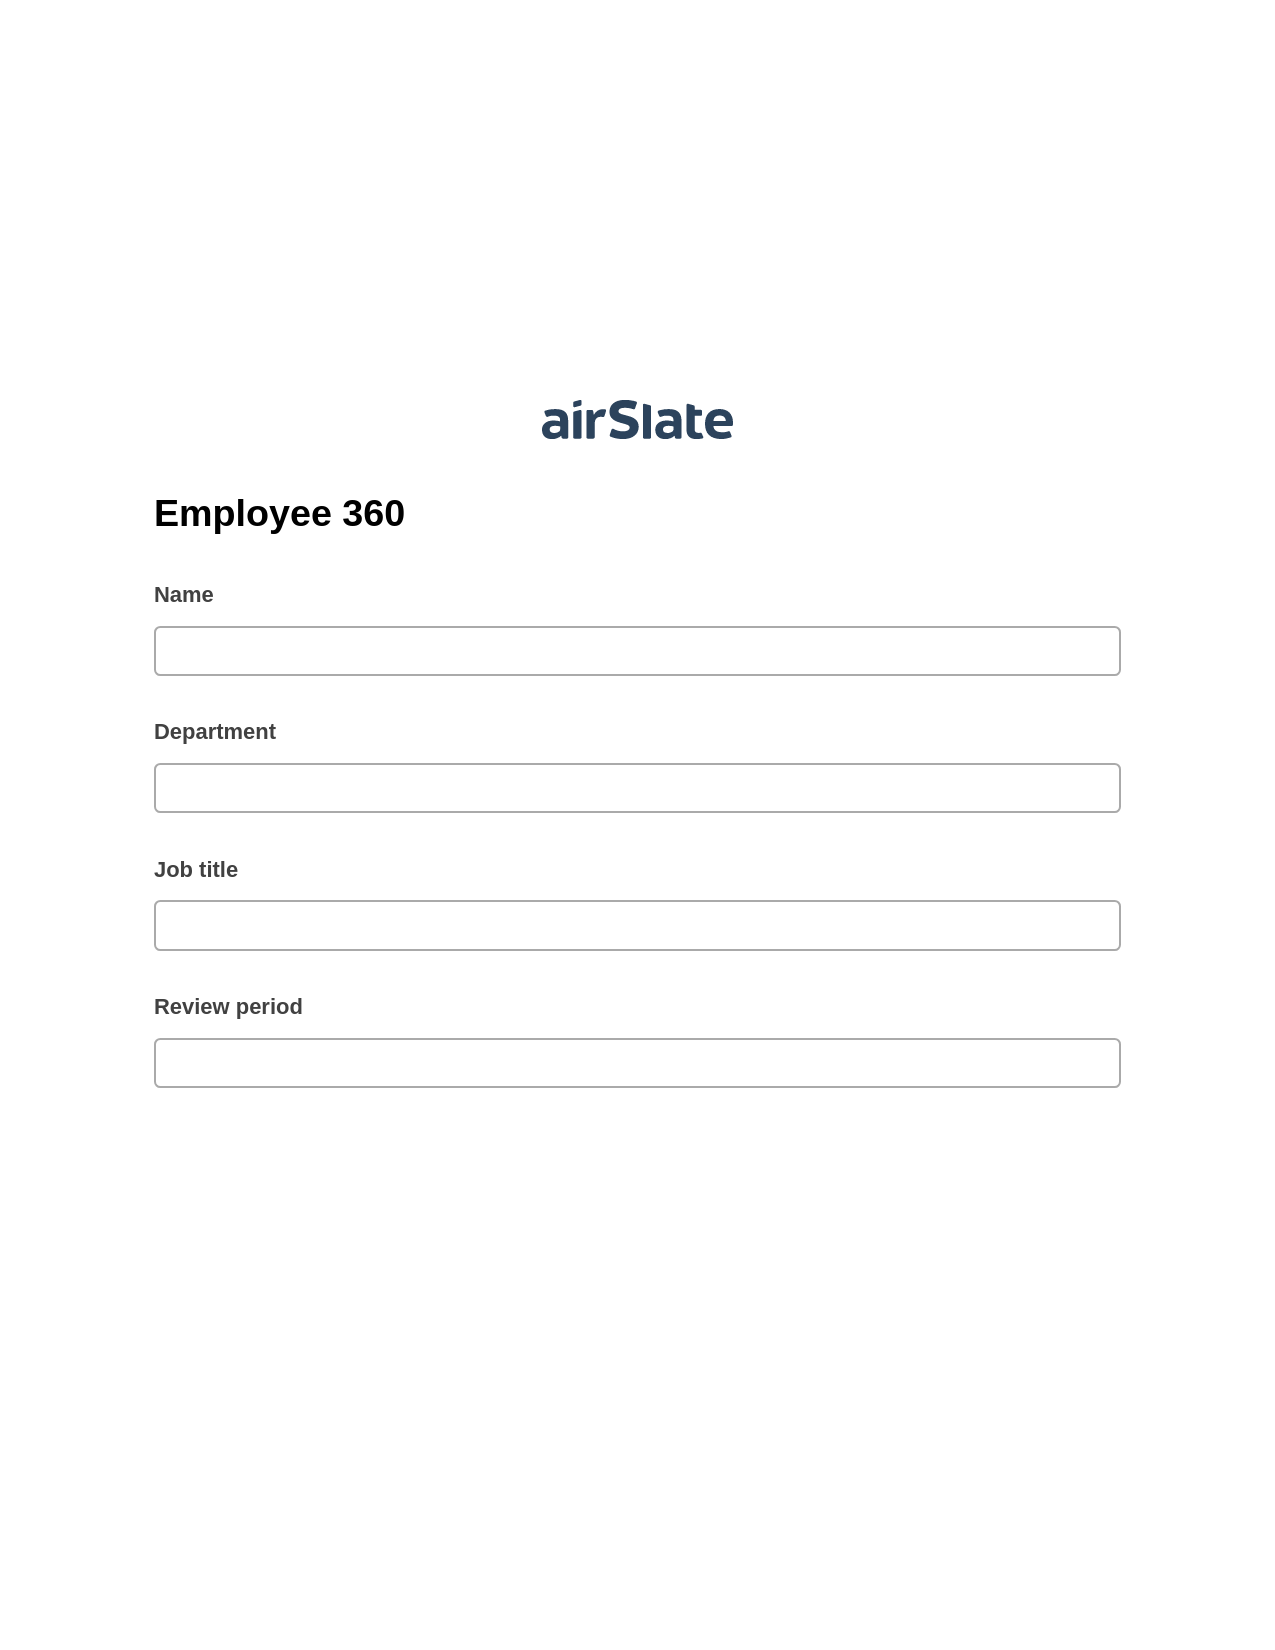 Multirole Employee 360 Pre-fill from CSV File Bot, Create MS Dynamics 365 Records Bot, Export to Google Sheet Bot